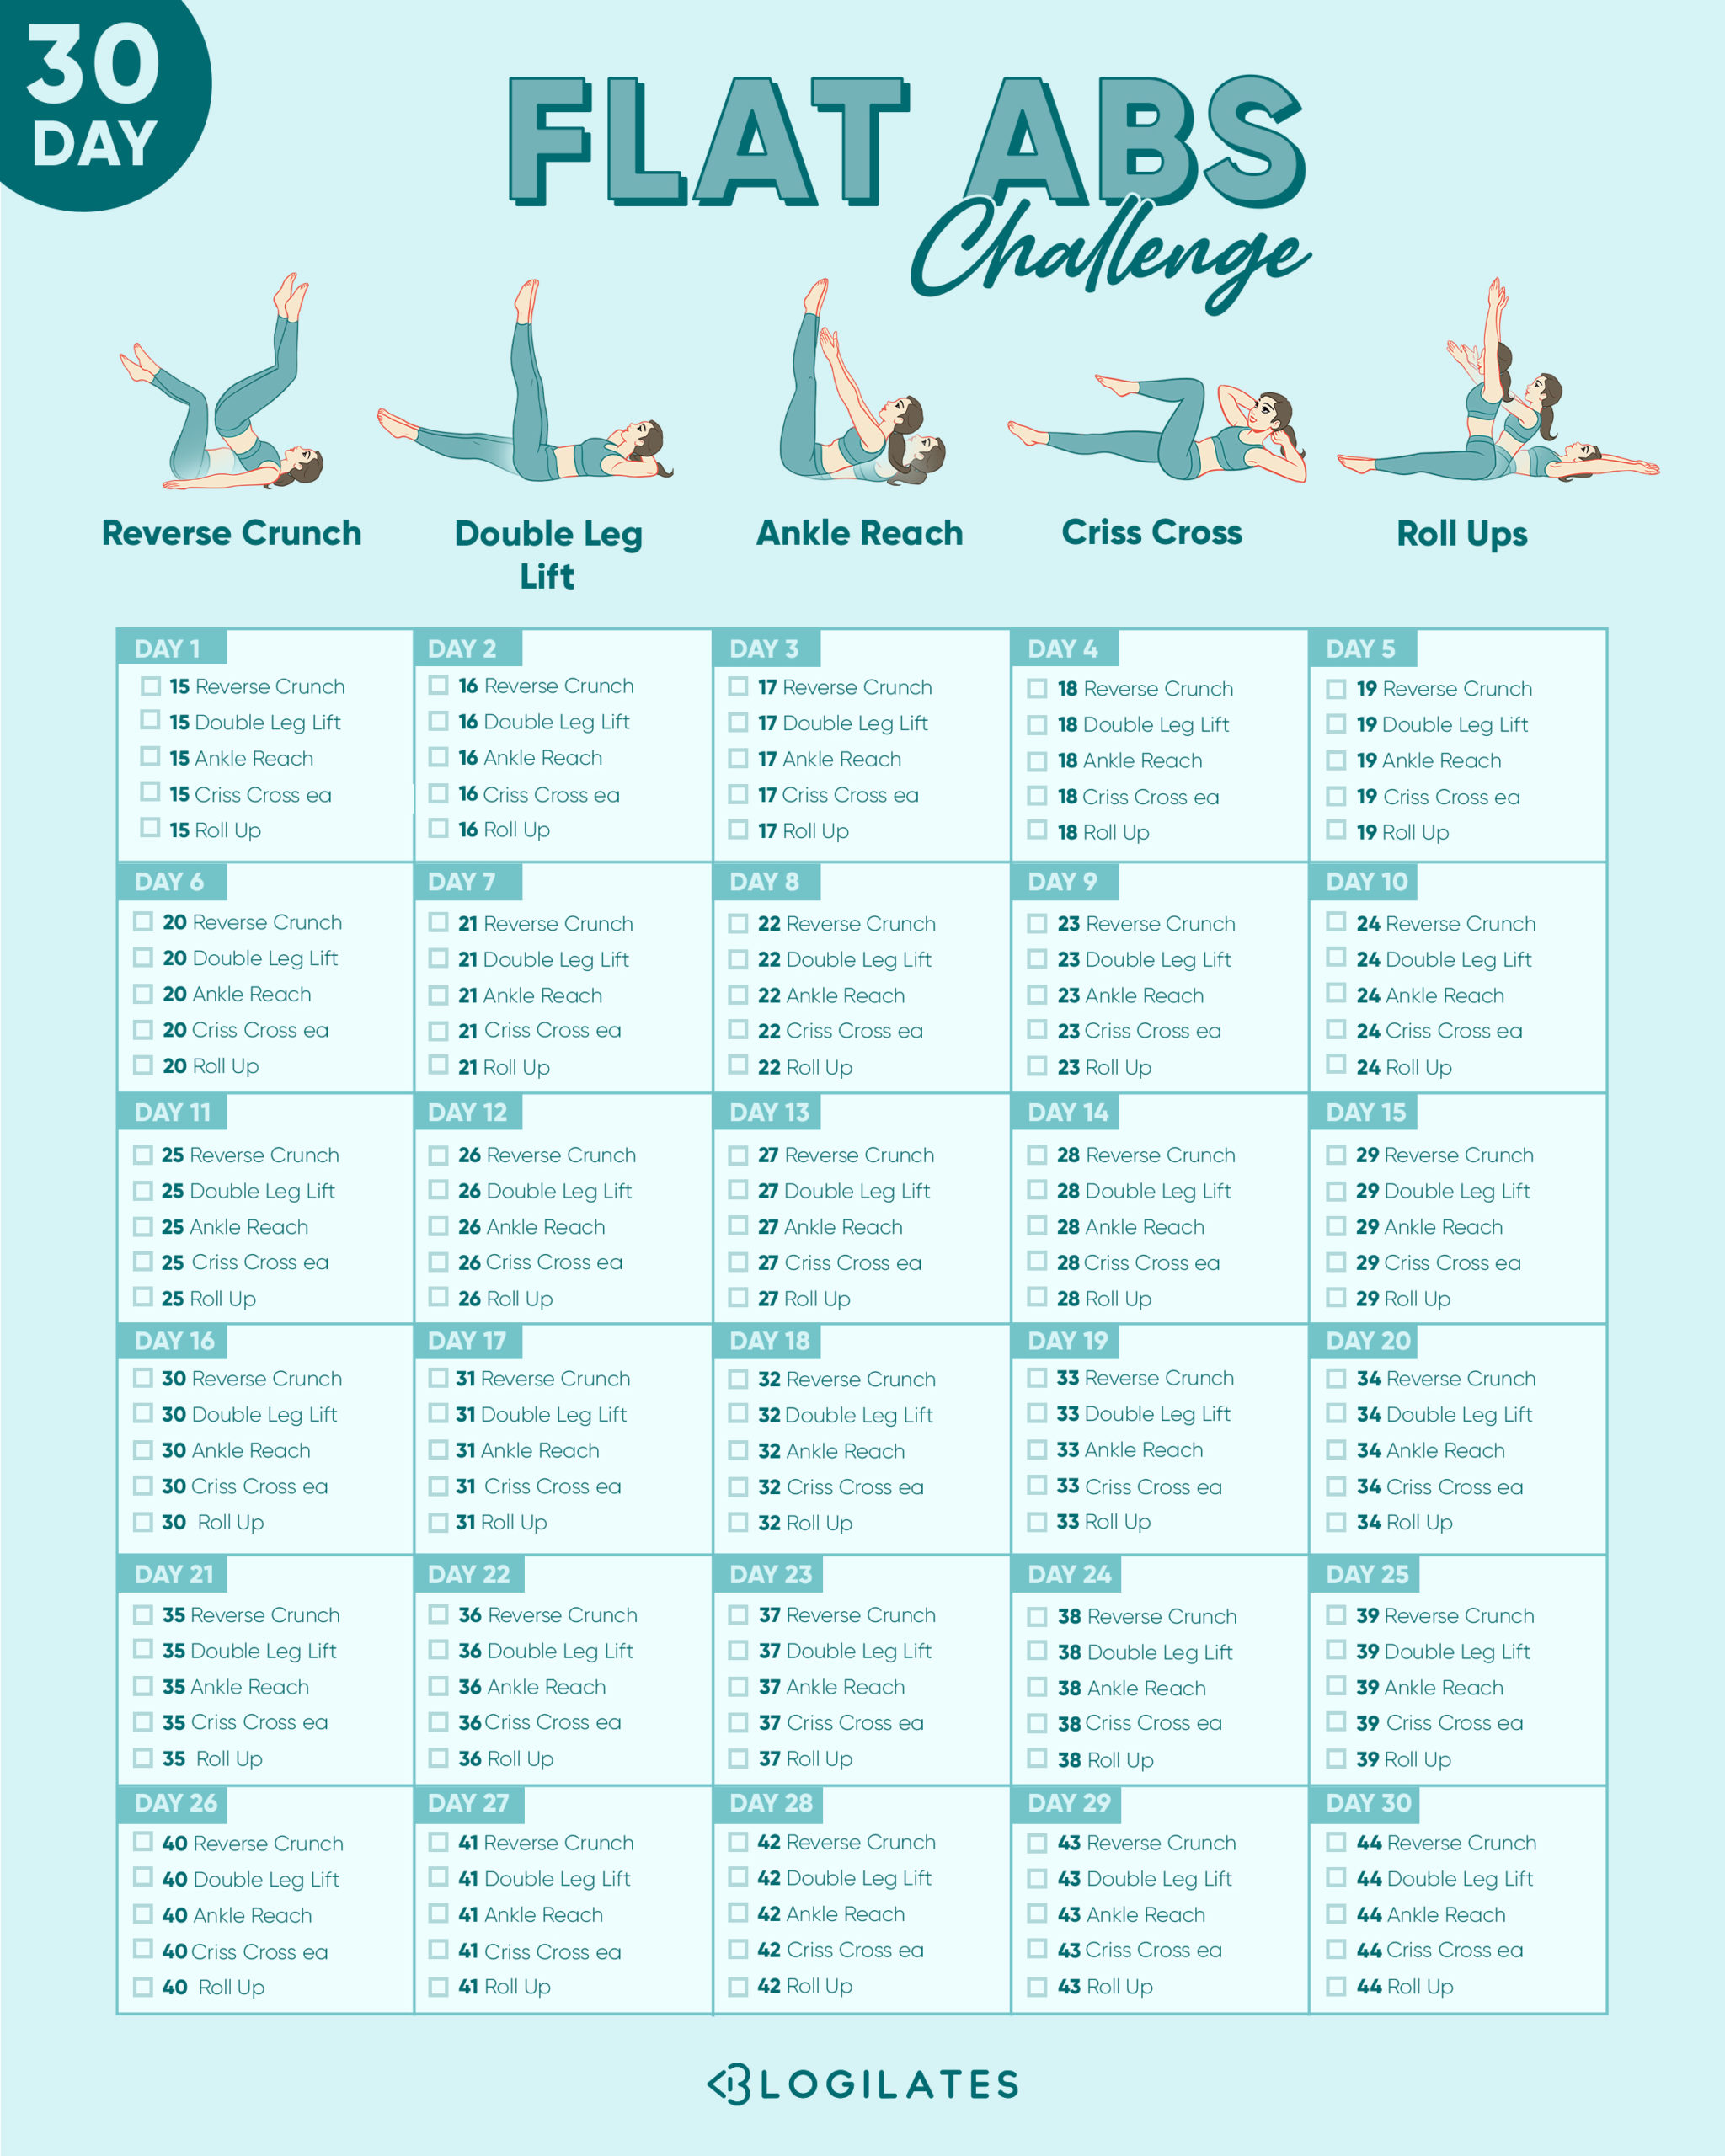 30 day inner thigh challenge results